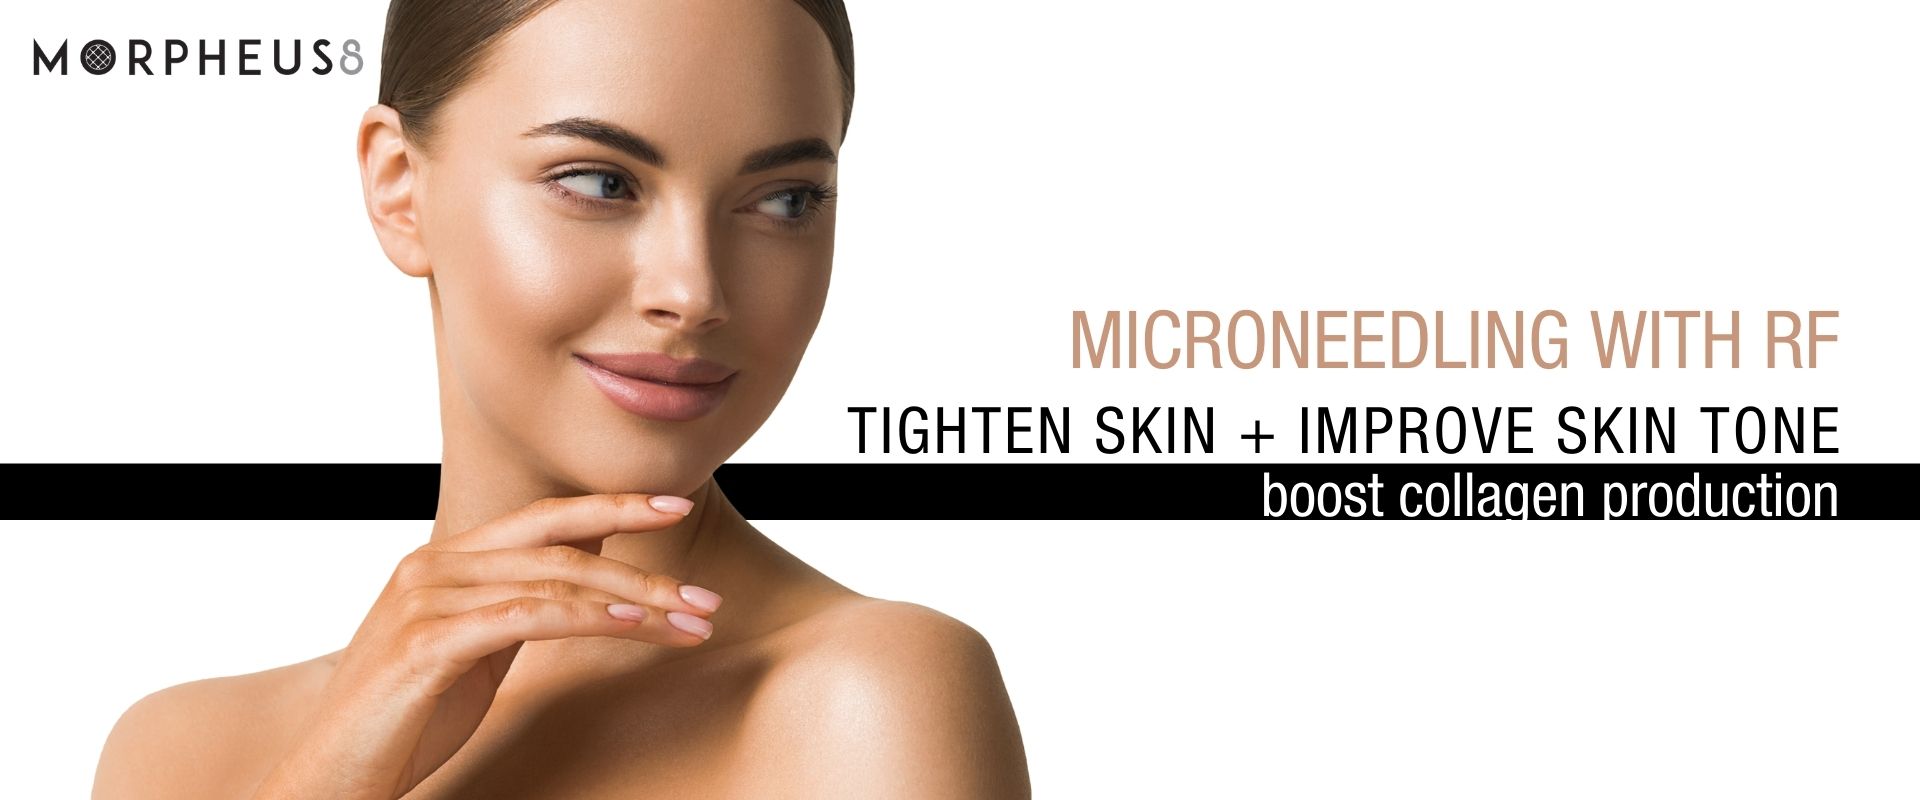 Woman with rejuvenated skin promoting a Morpheus 8 RF Microneedling treatment